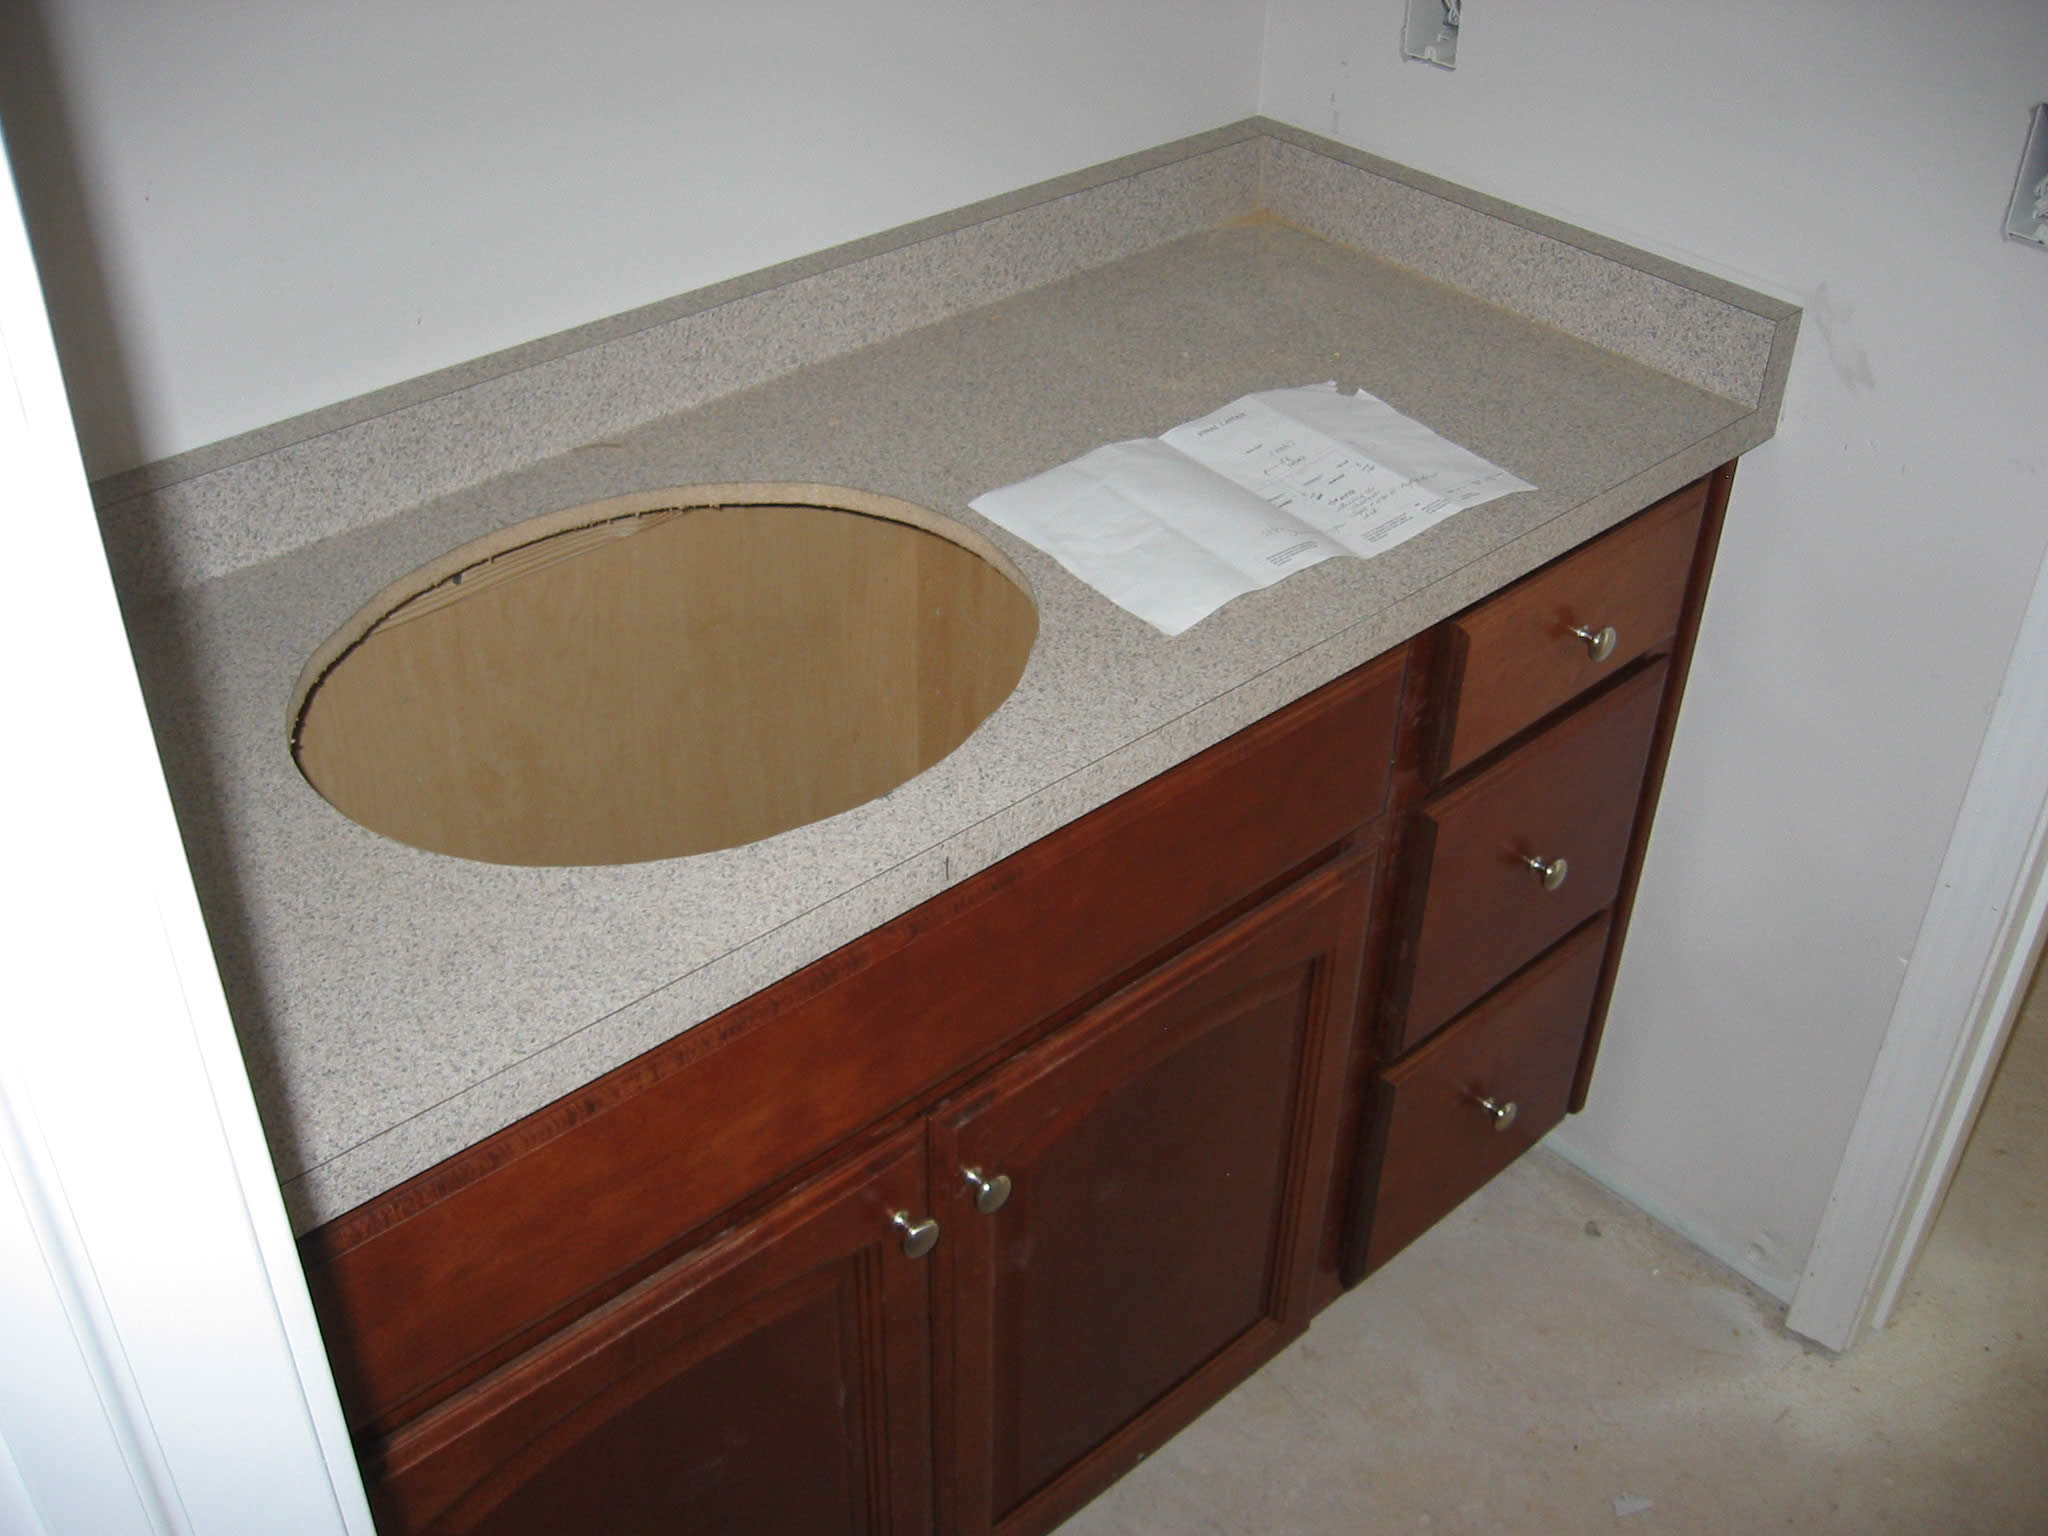 Our Main Bath Cabinets and Countertop